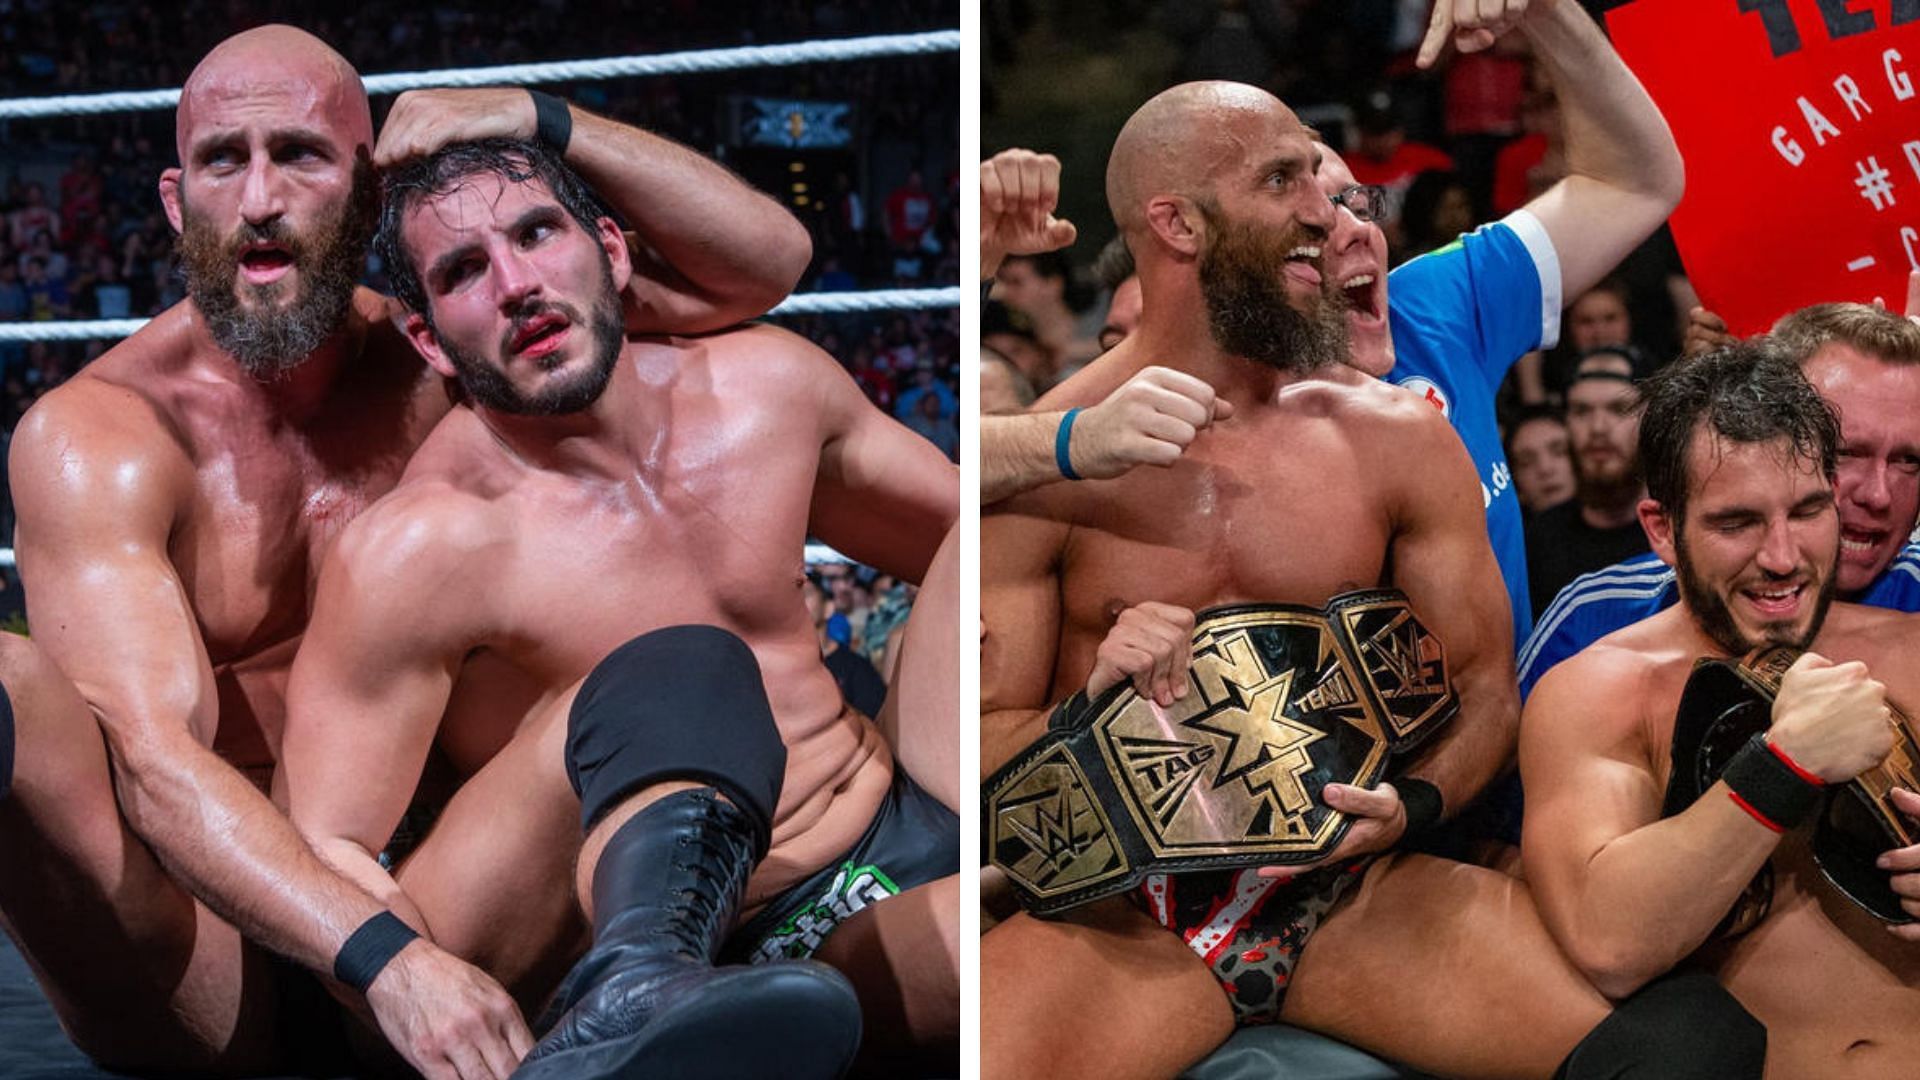 Johnny Gargano and Tommaso Ciampa were a top tag team back in NXT